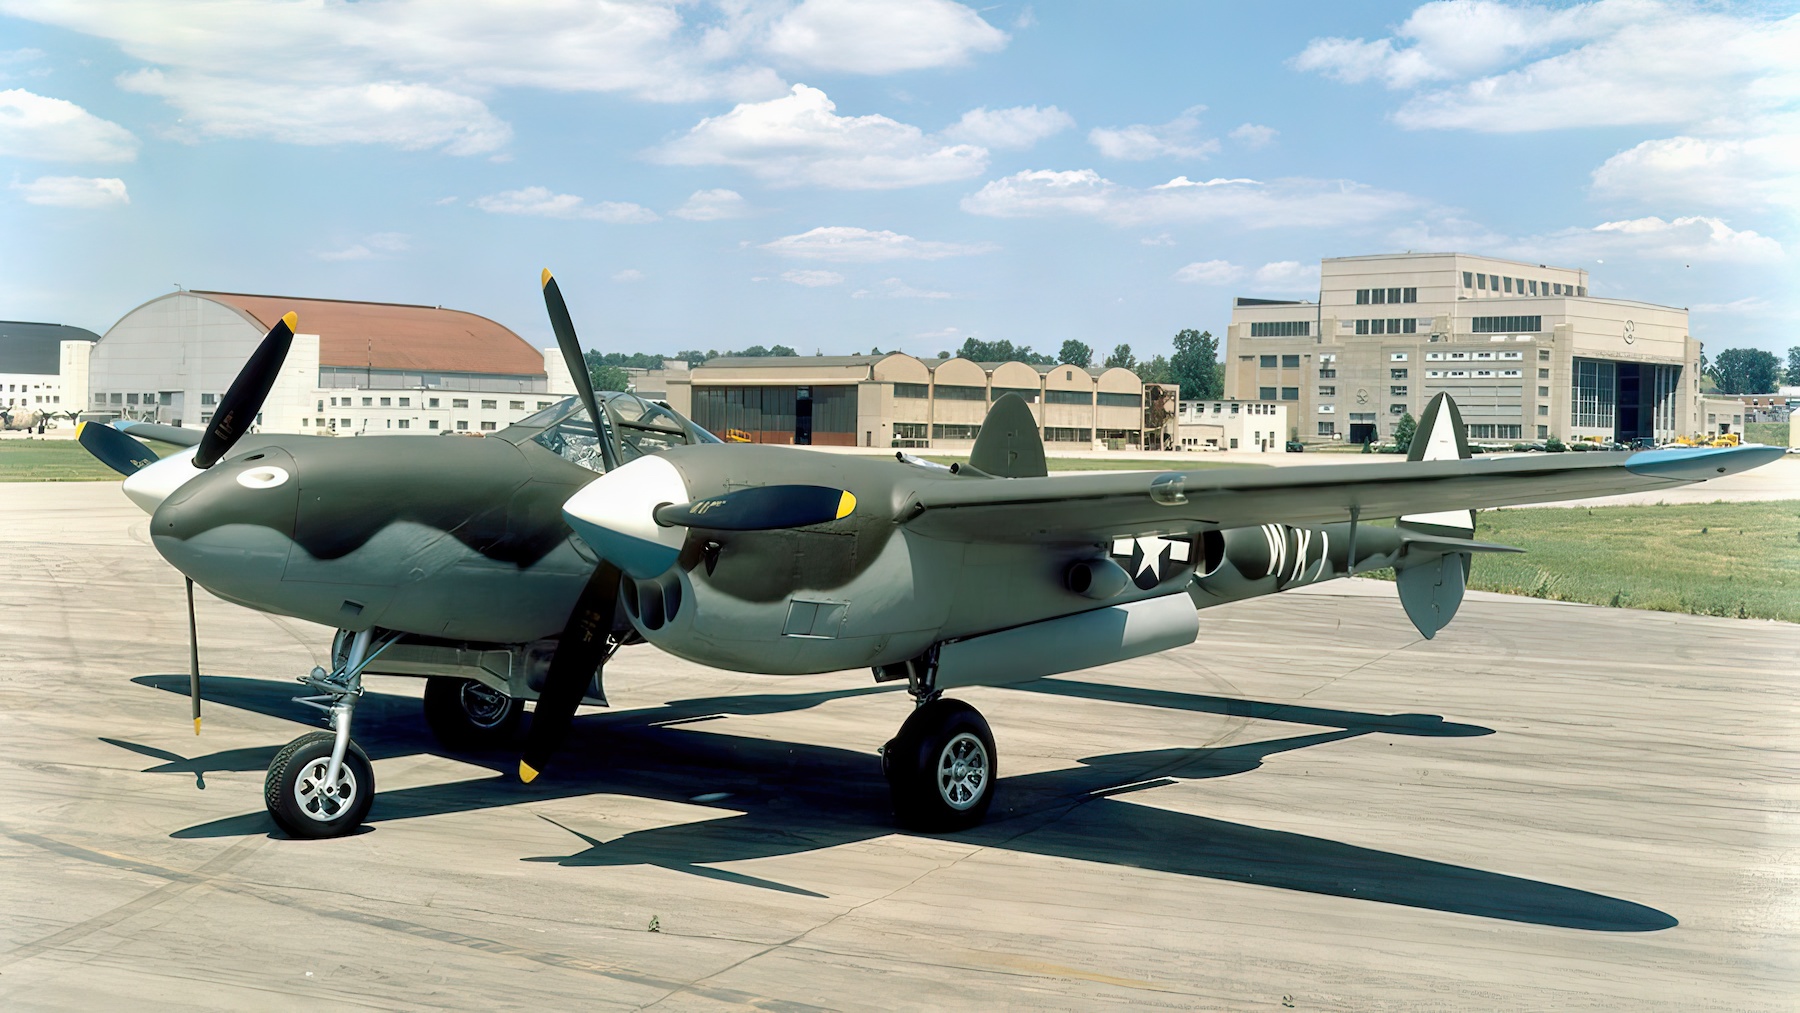 Lockheed P-38L Lightning at the National Museum of the United States Air Force